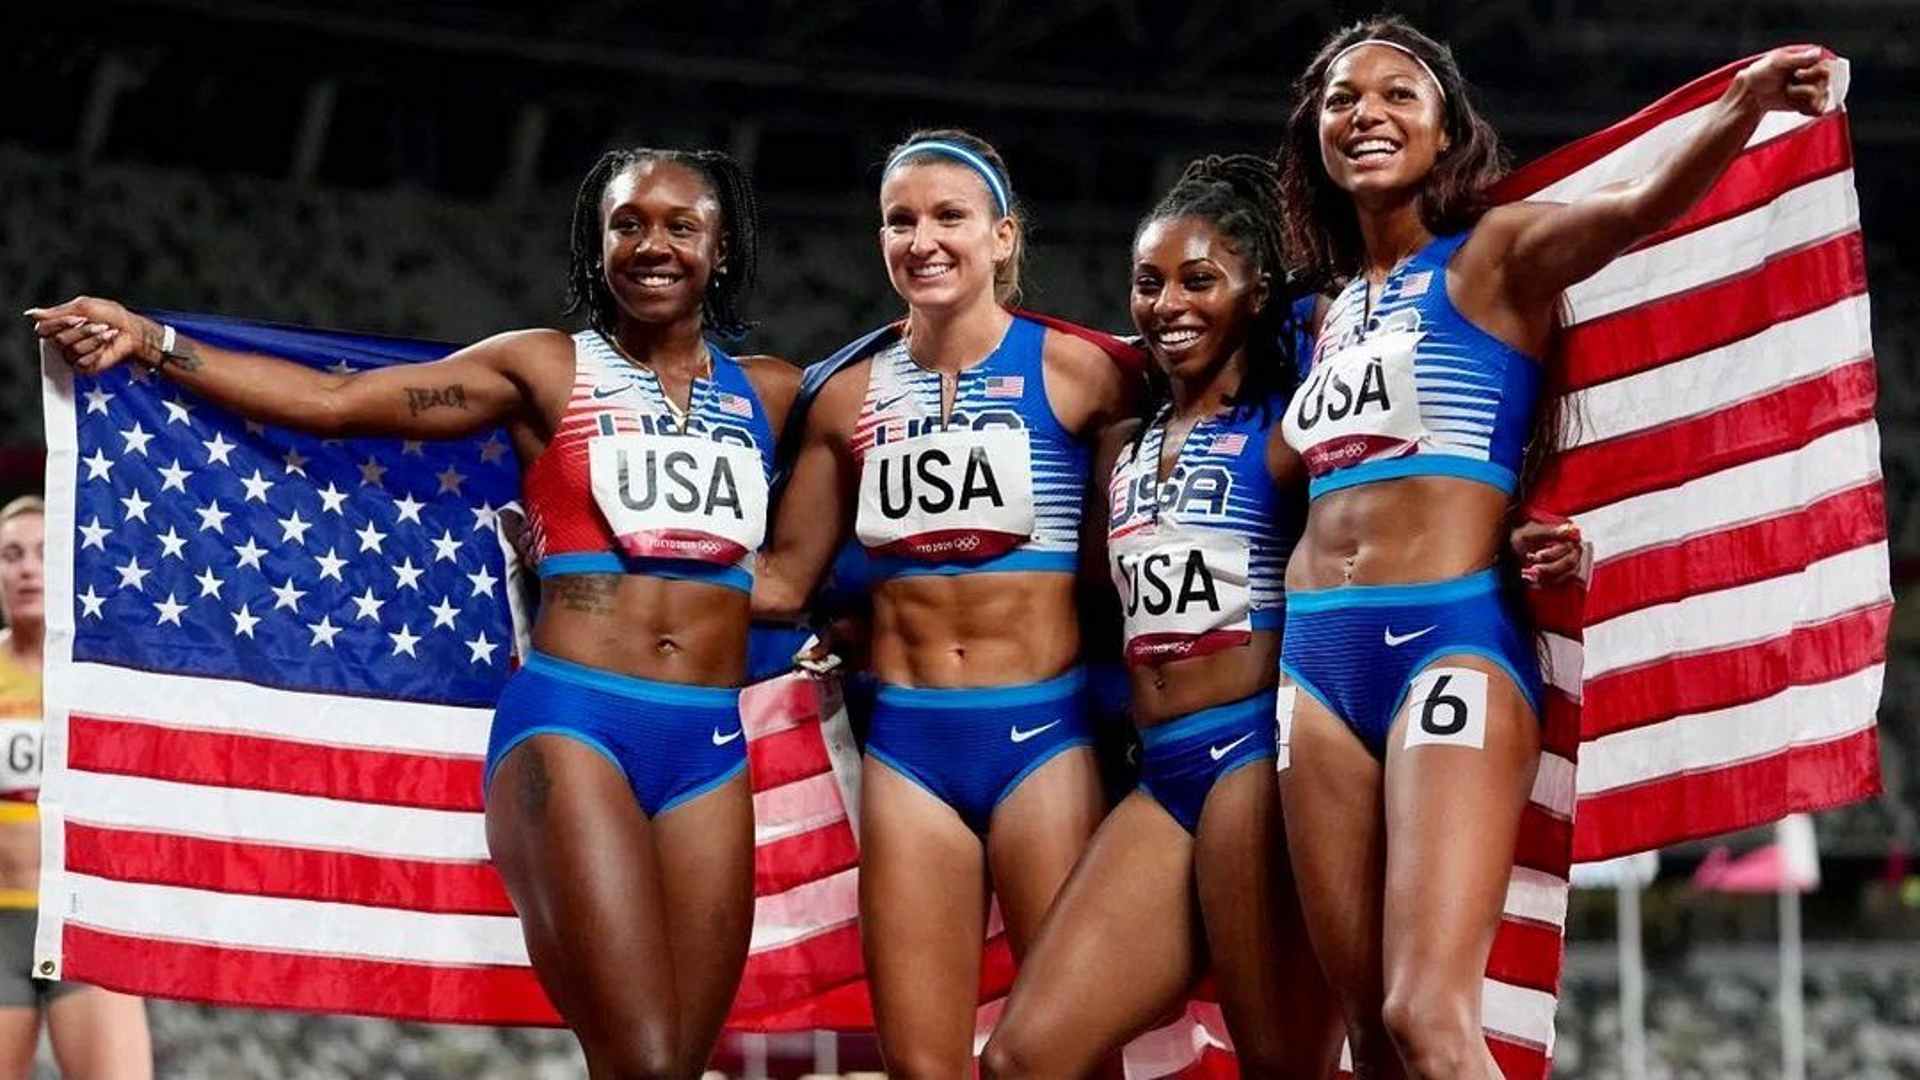 Team USA after their silver medal win at the 4X100m relay event at Tokyo Olympics 2020 (Image Credits - Instagram/ @gabbythomas)